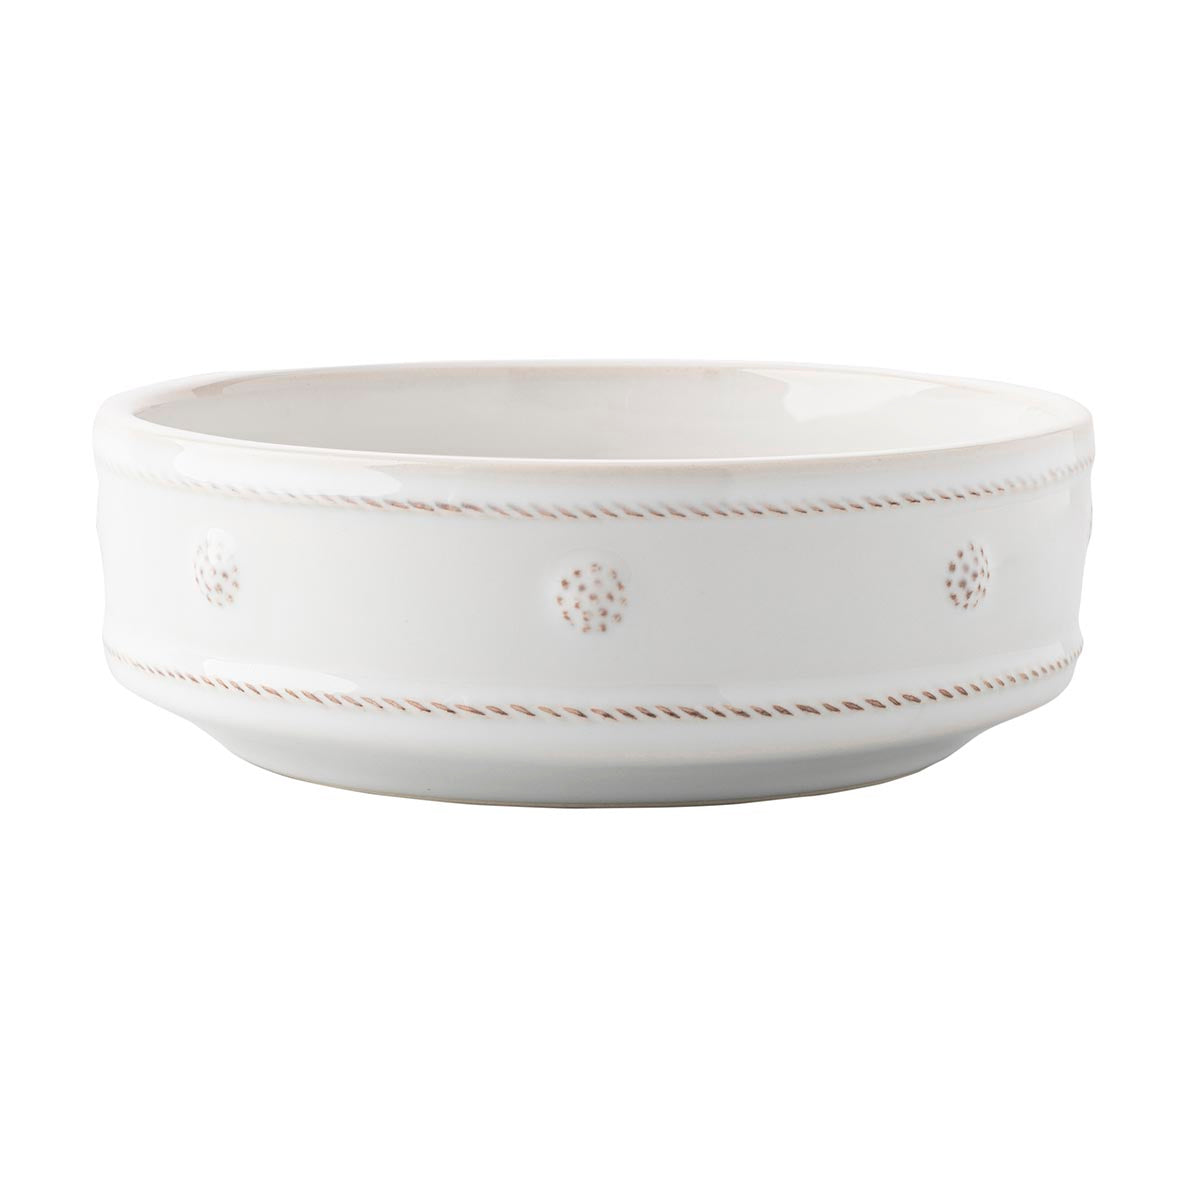 Berry & Thread 8.25in Pet Bowl - Whitewash-2nd